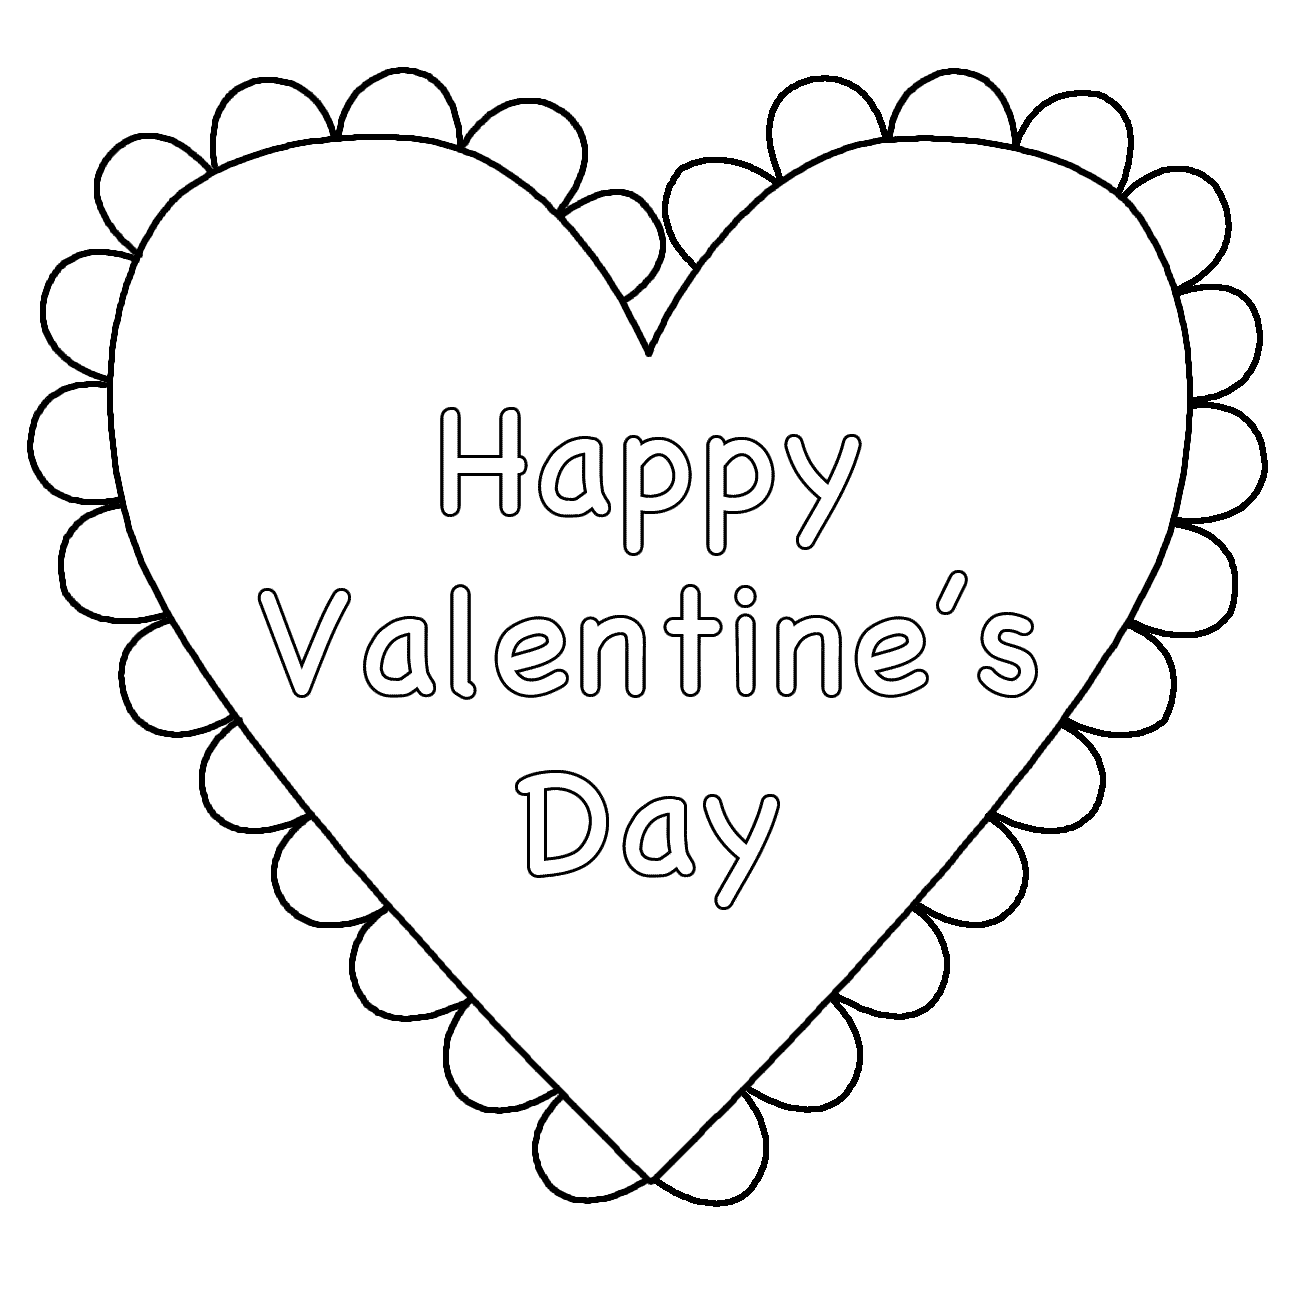 free-heart-coloring-pages-printable-download-free-heart-coloring-pages